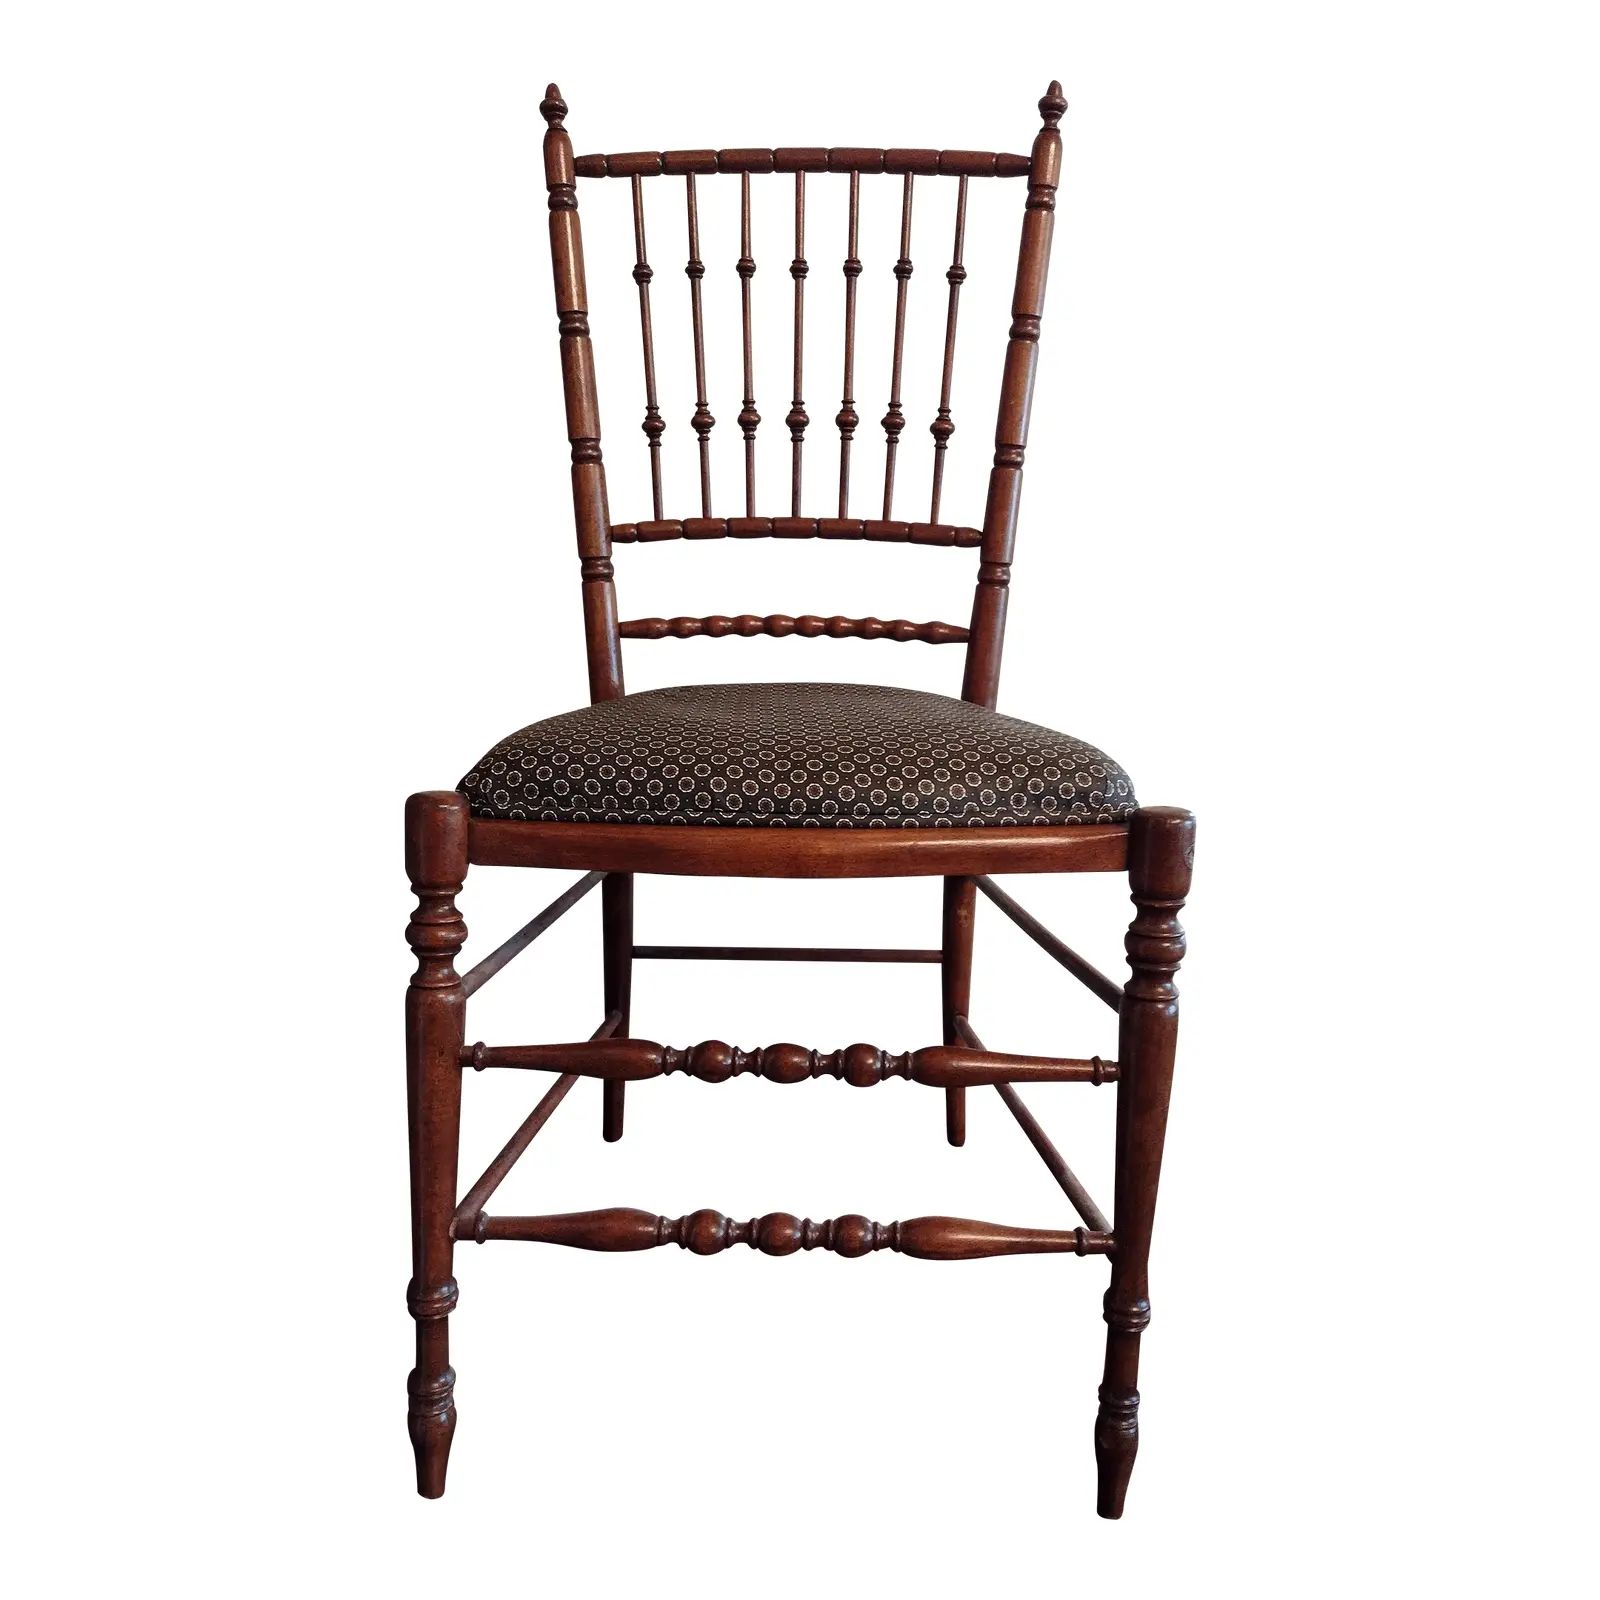 Antique Wood Turned Spindle Colonial Style Chair With a Faux Bamboo Look | Chairish